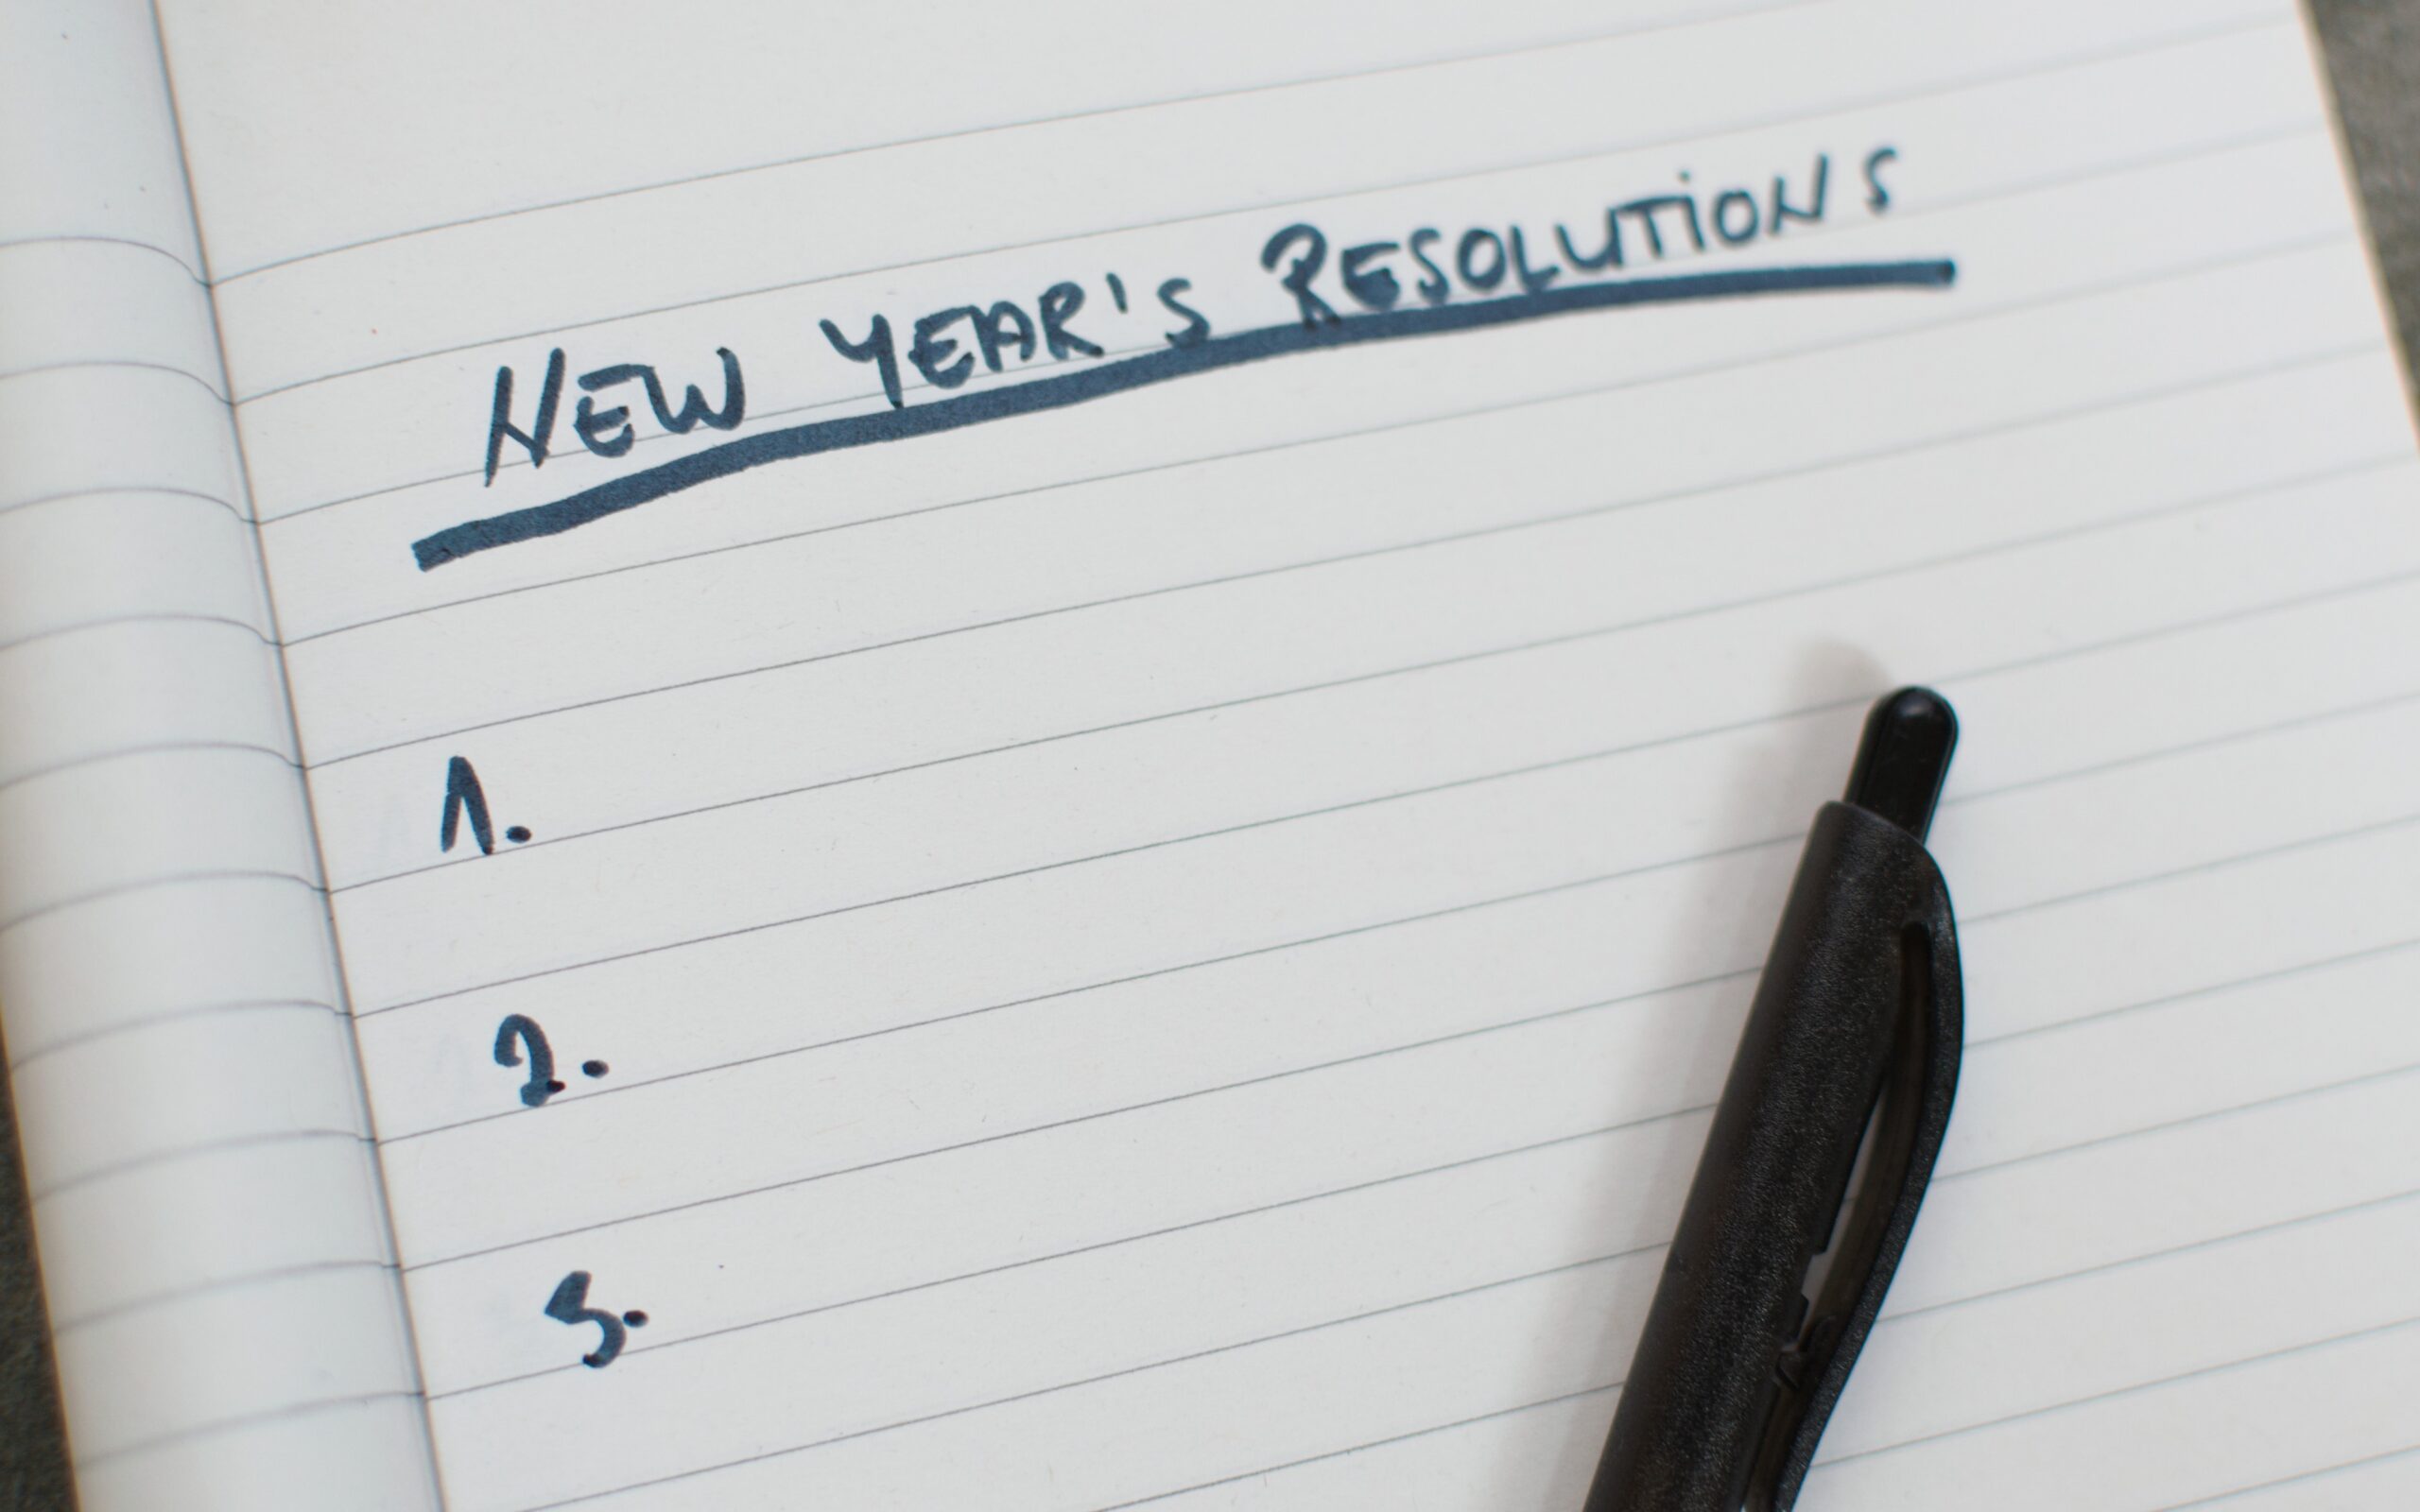 Sheet of paper with "New Year's Resolutions" written at the top with spaces numbered 1-3